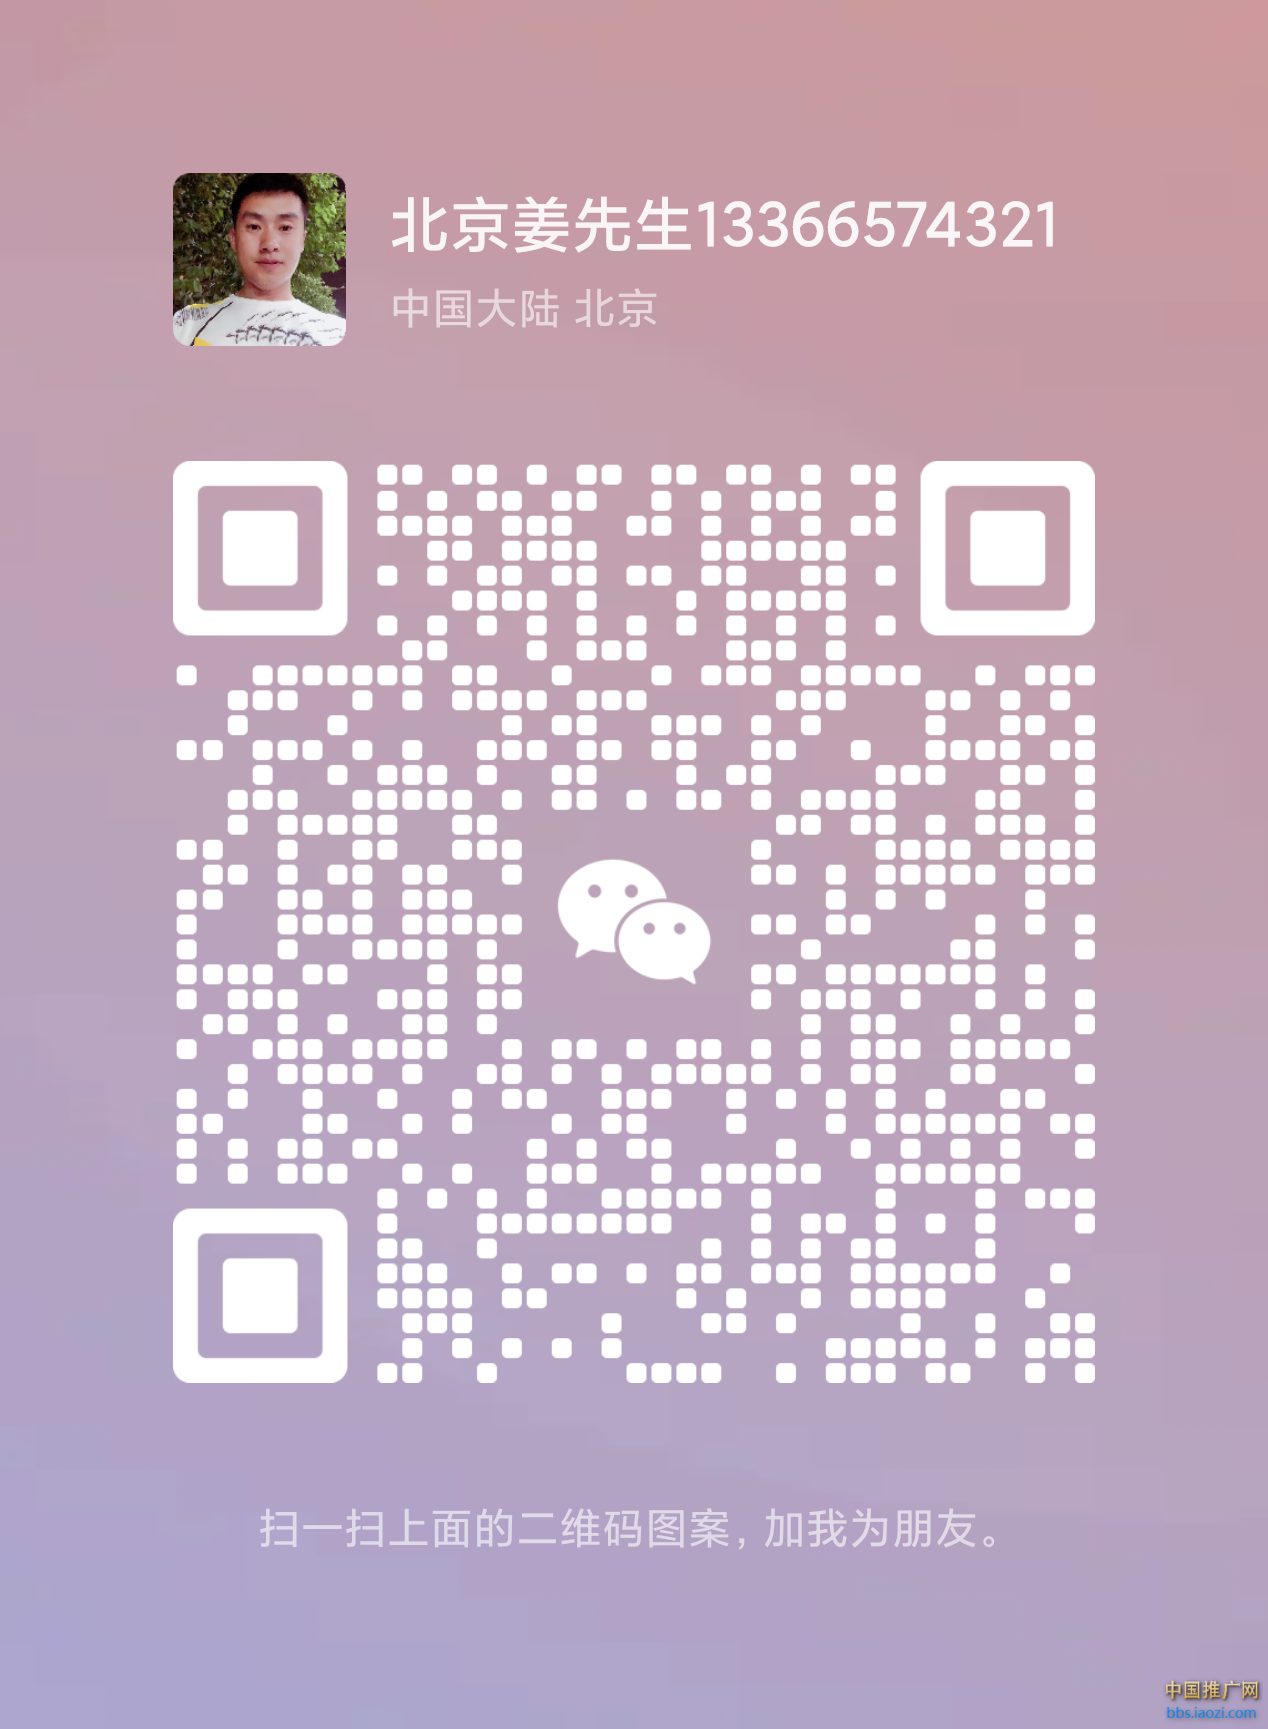 mmqrcode1677582636756.png